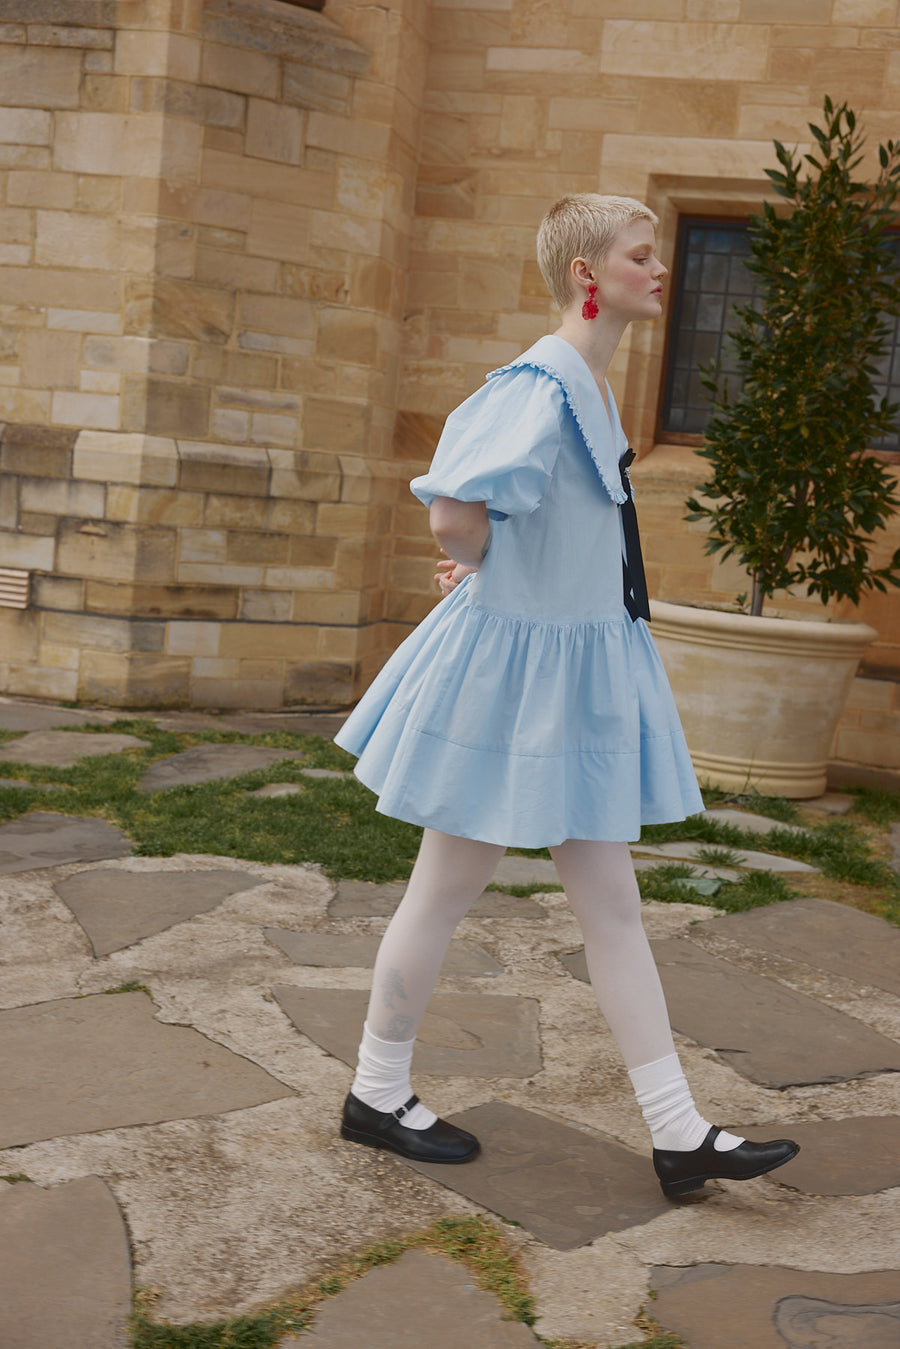 Hazel Mini Shirt Dress in oxford blue cotton for House of Campbell Spring Summer campaign.